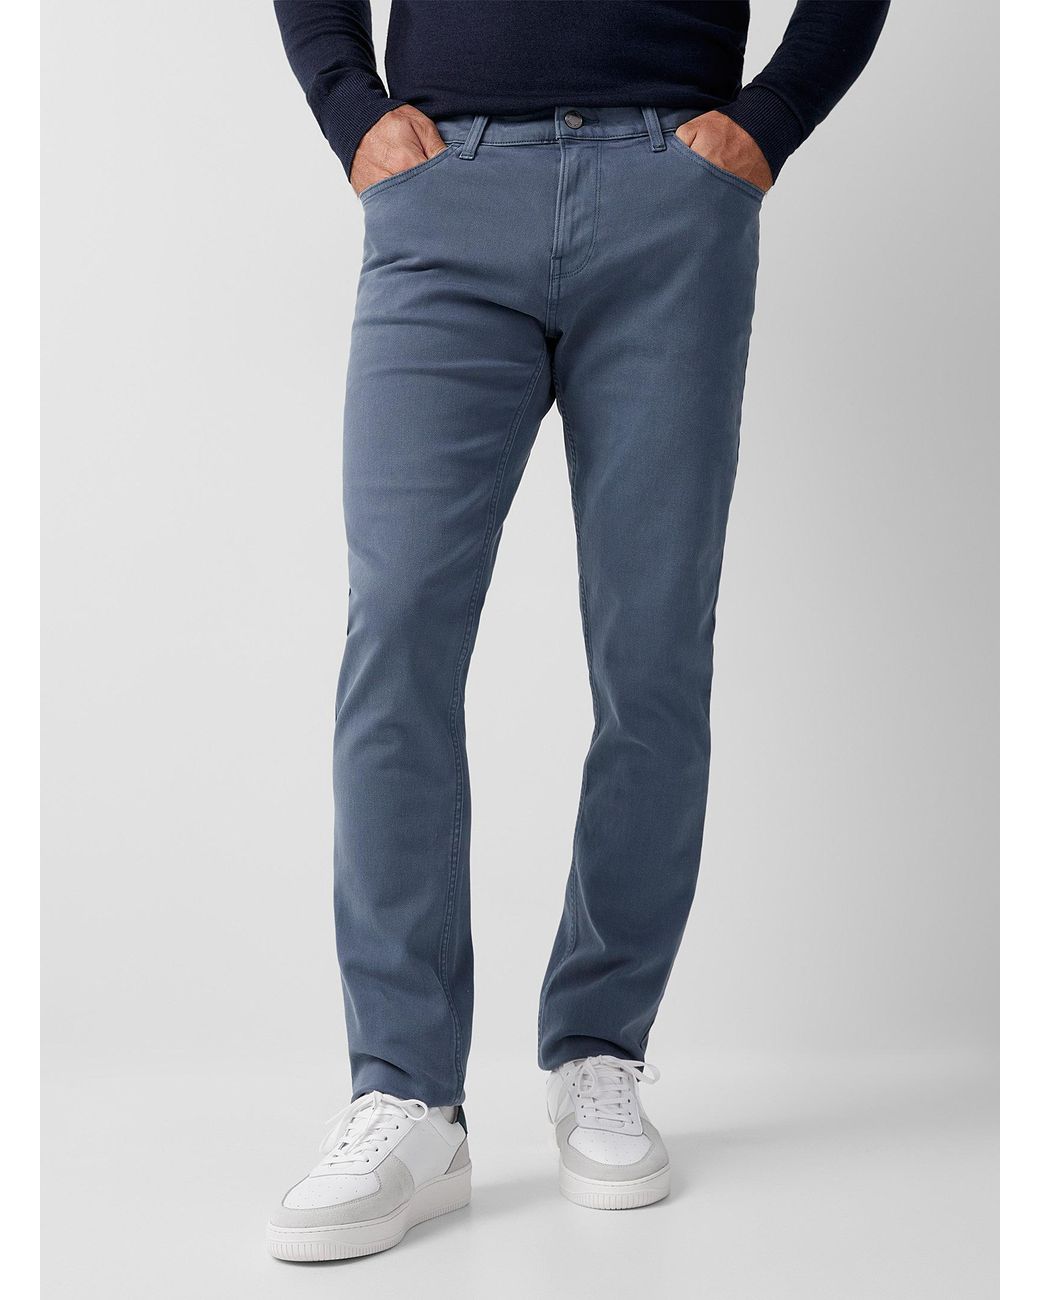 Michael Kors Cotton Colourful Stretch Jean Slim Fit in Blue for Men | Lyst